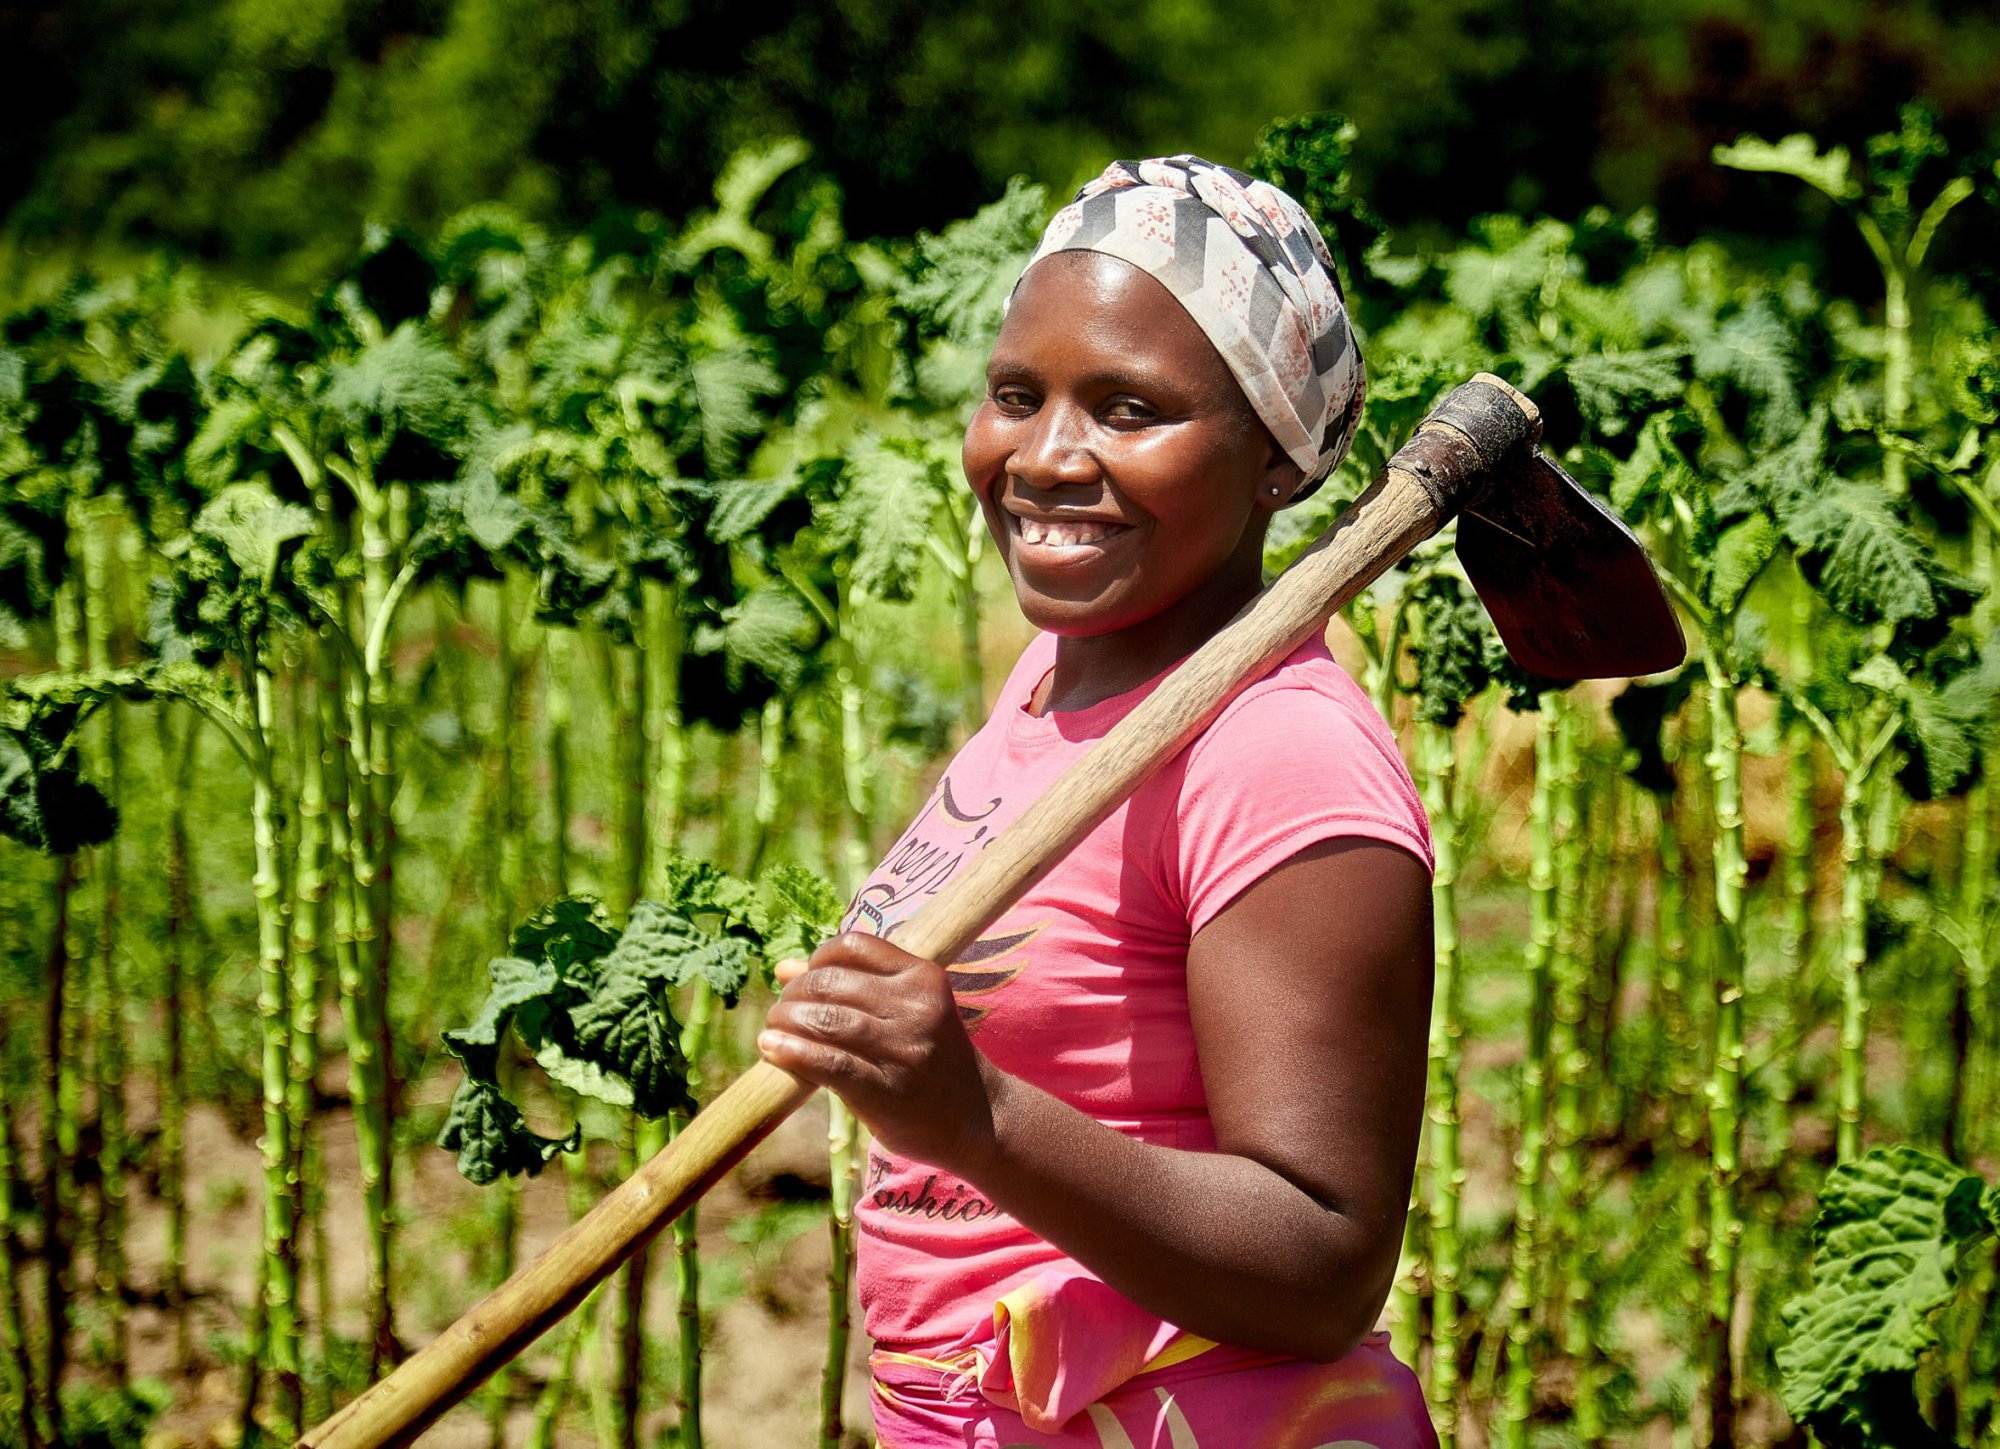 A smiling woman holding an ax in a field, showcasing farming that works with resources effectively.